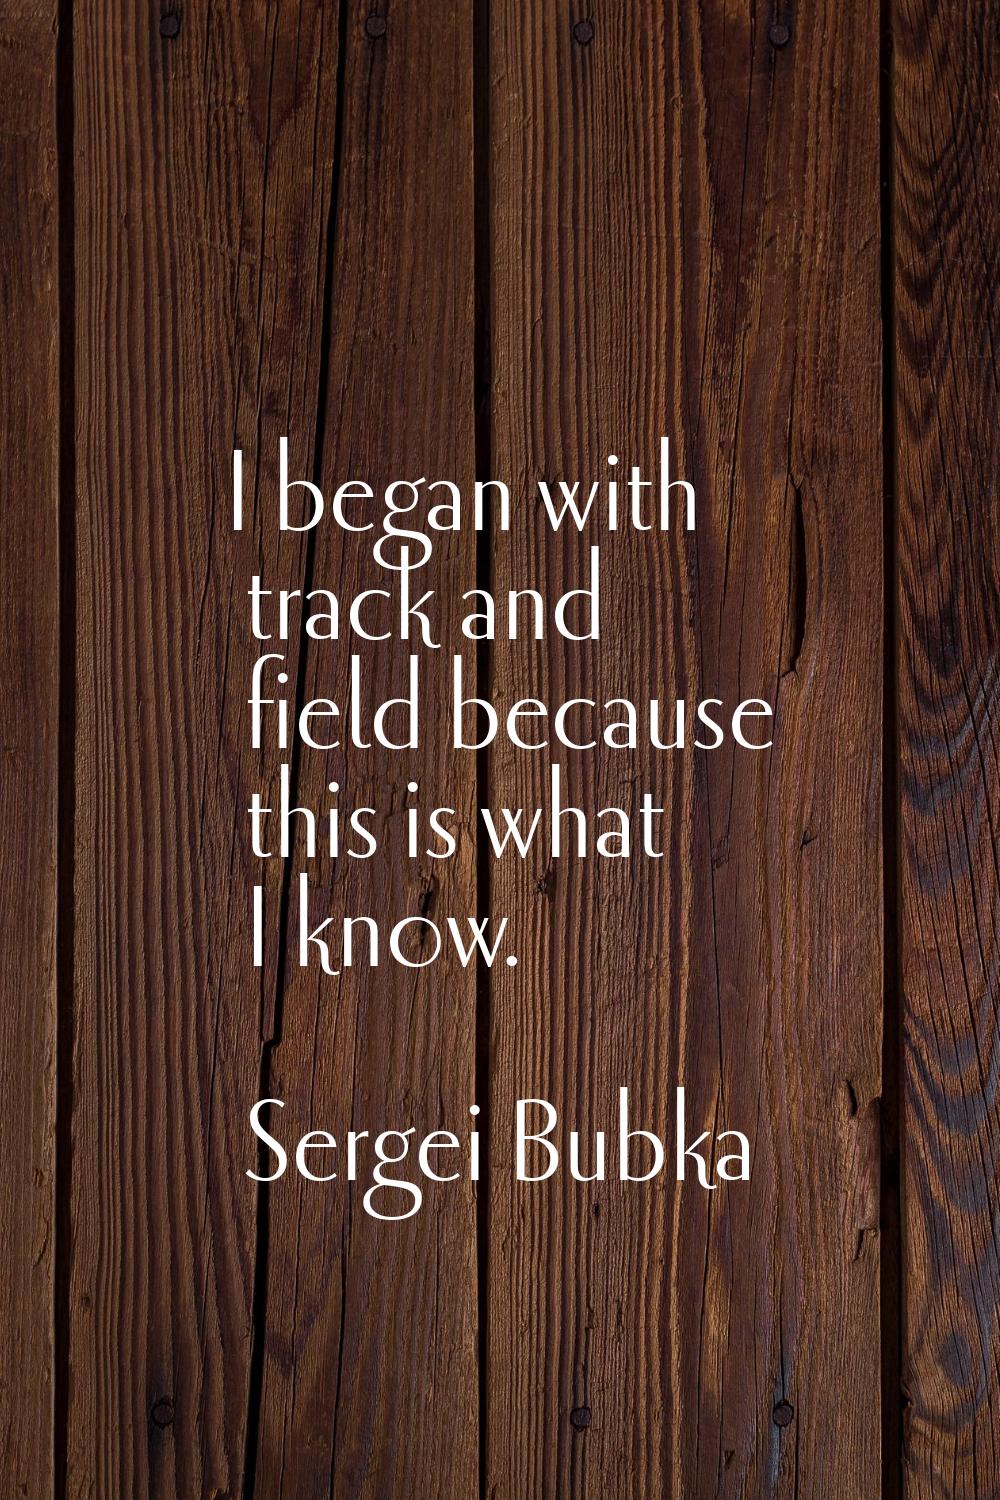 I began with track and field because this is what I know.